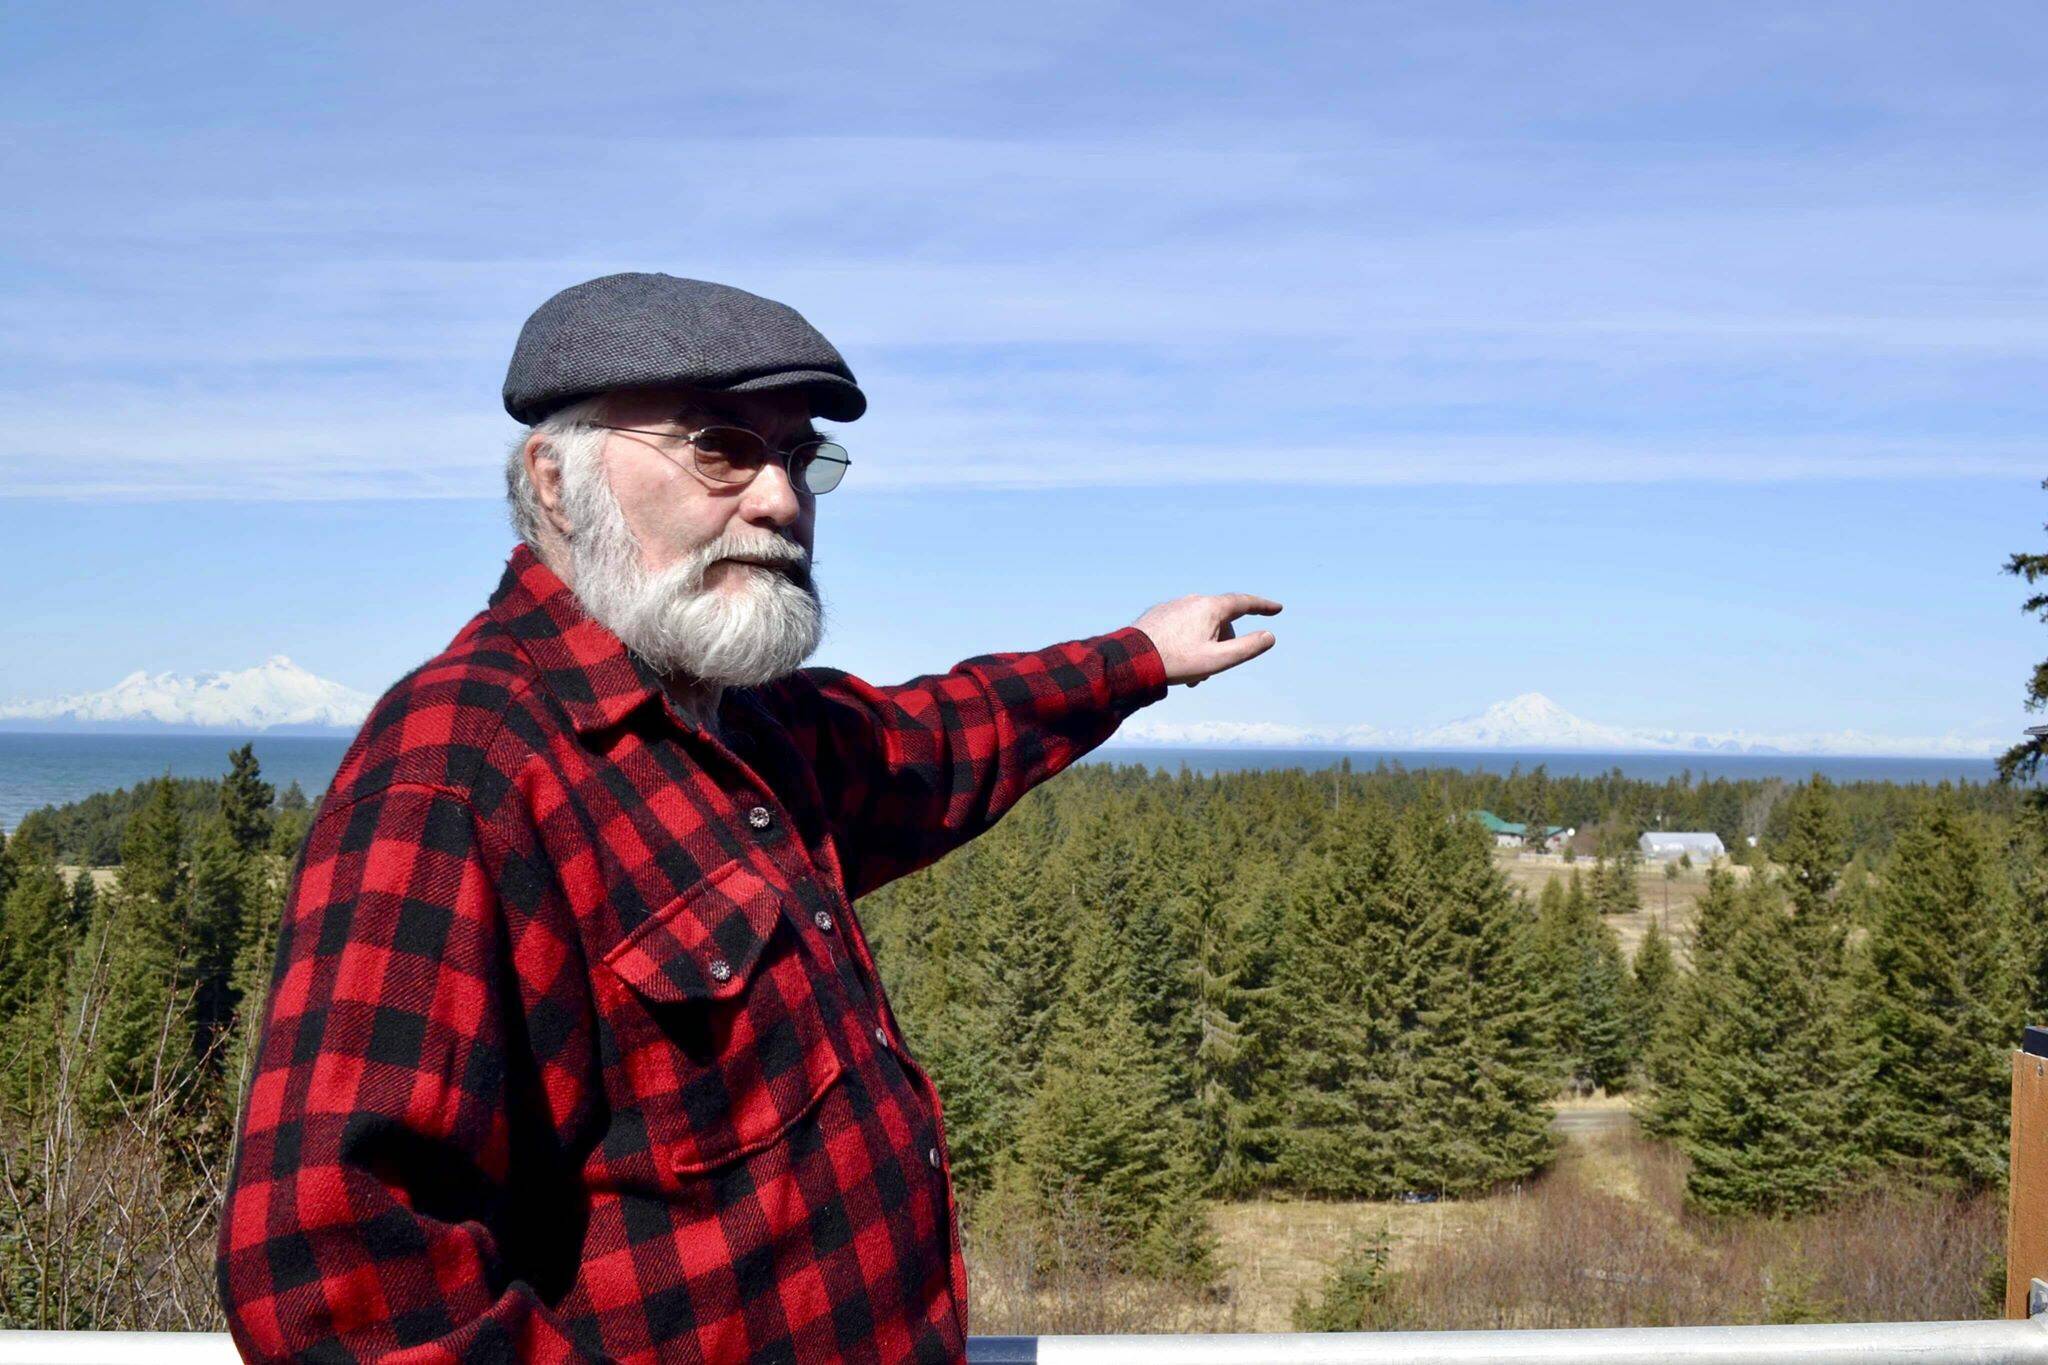 Pete Kineen, a neighbor of the proposed Beachcomber LLC gravel pit, stands on his deck and points to where the pit could be, on May 2, 2019, in Anchor Point, Alaska. (Photo by Victoria Petersen/Peninsula Clarion)
Pete Kineen, a neighbor of the proposed Beachcomber LLC gravel pit, stands on his deck and points to where the pit could be, on May 2, 2019, in Anchor Point, Alaska. (Photo by Victoria Petersen/Peninsula Clarion)